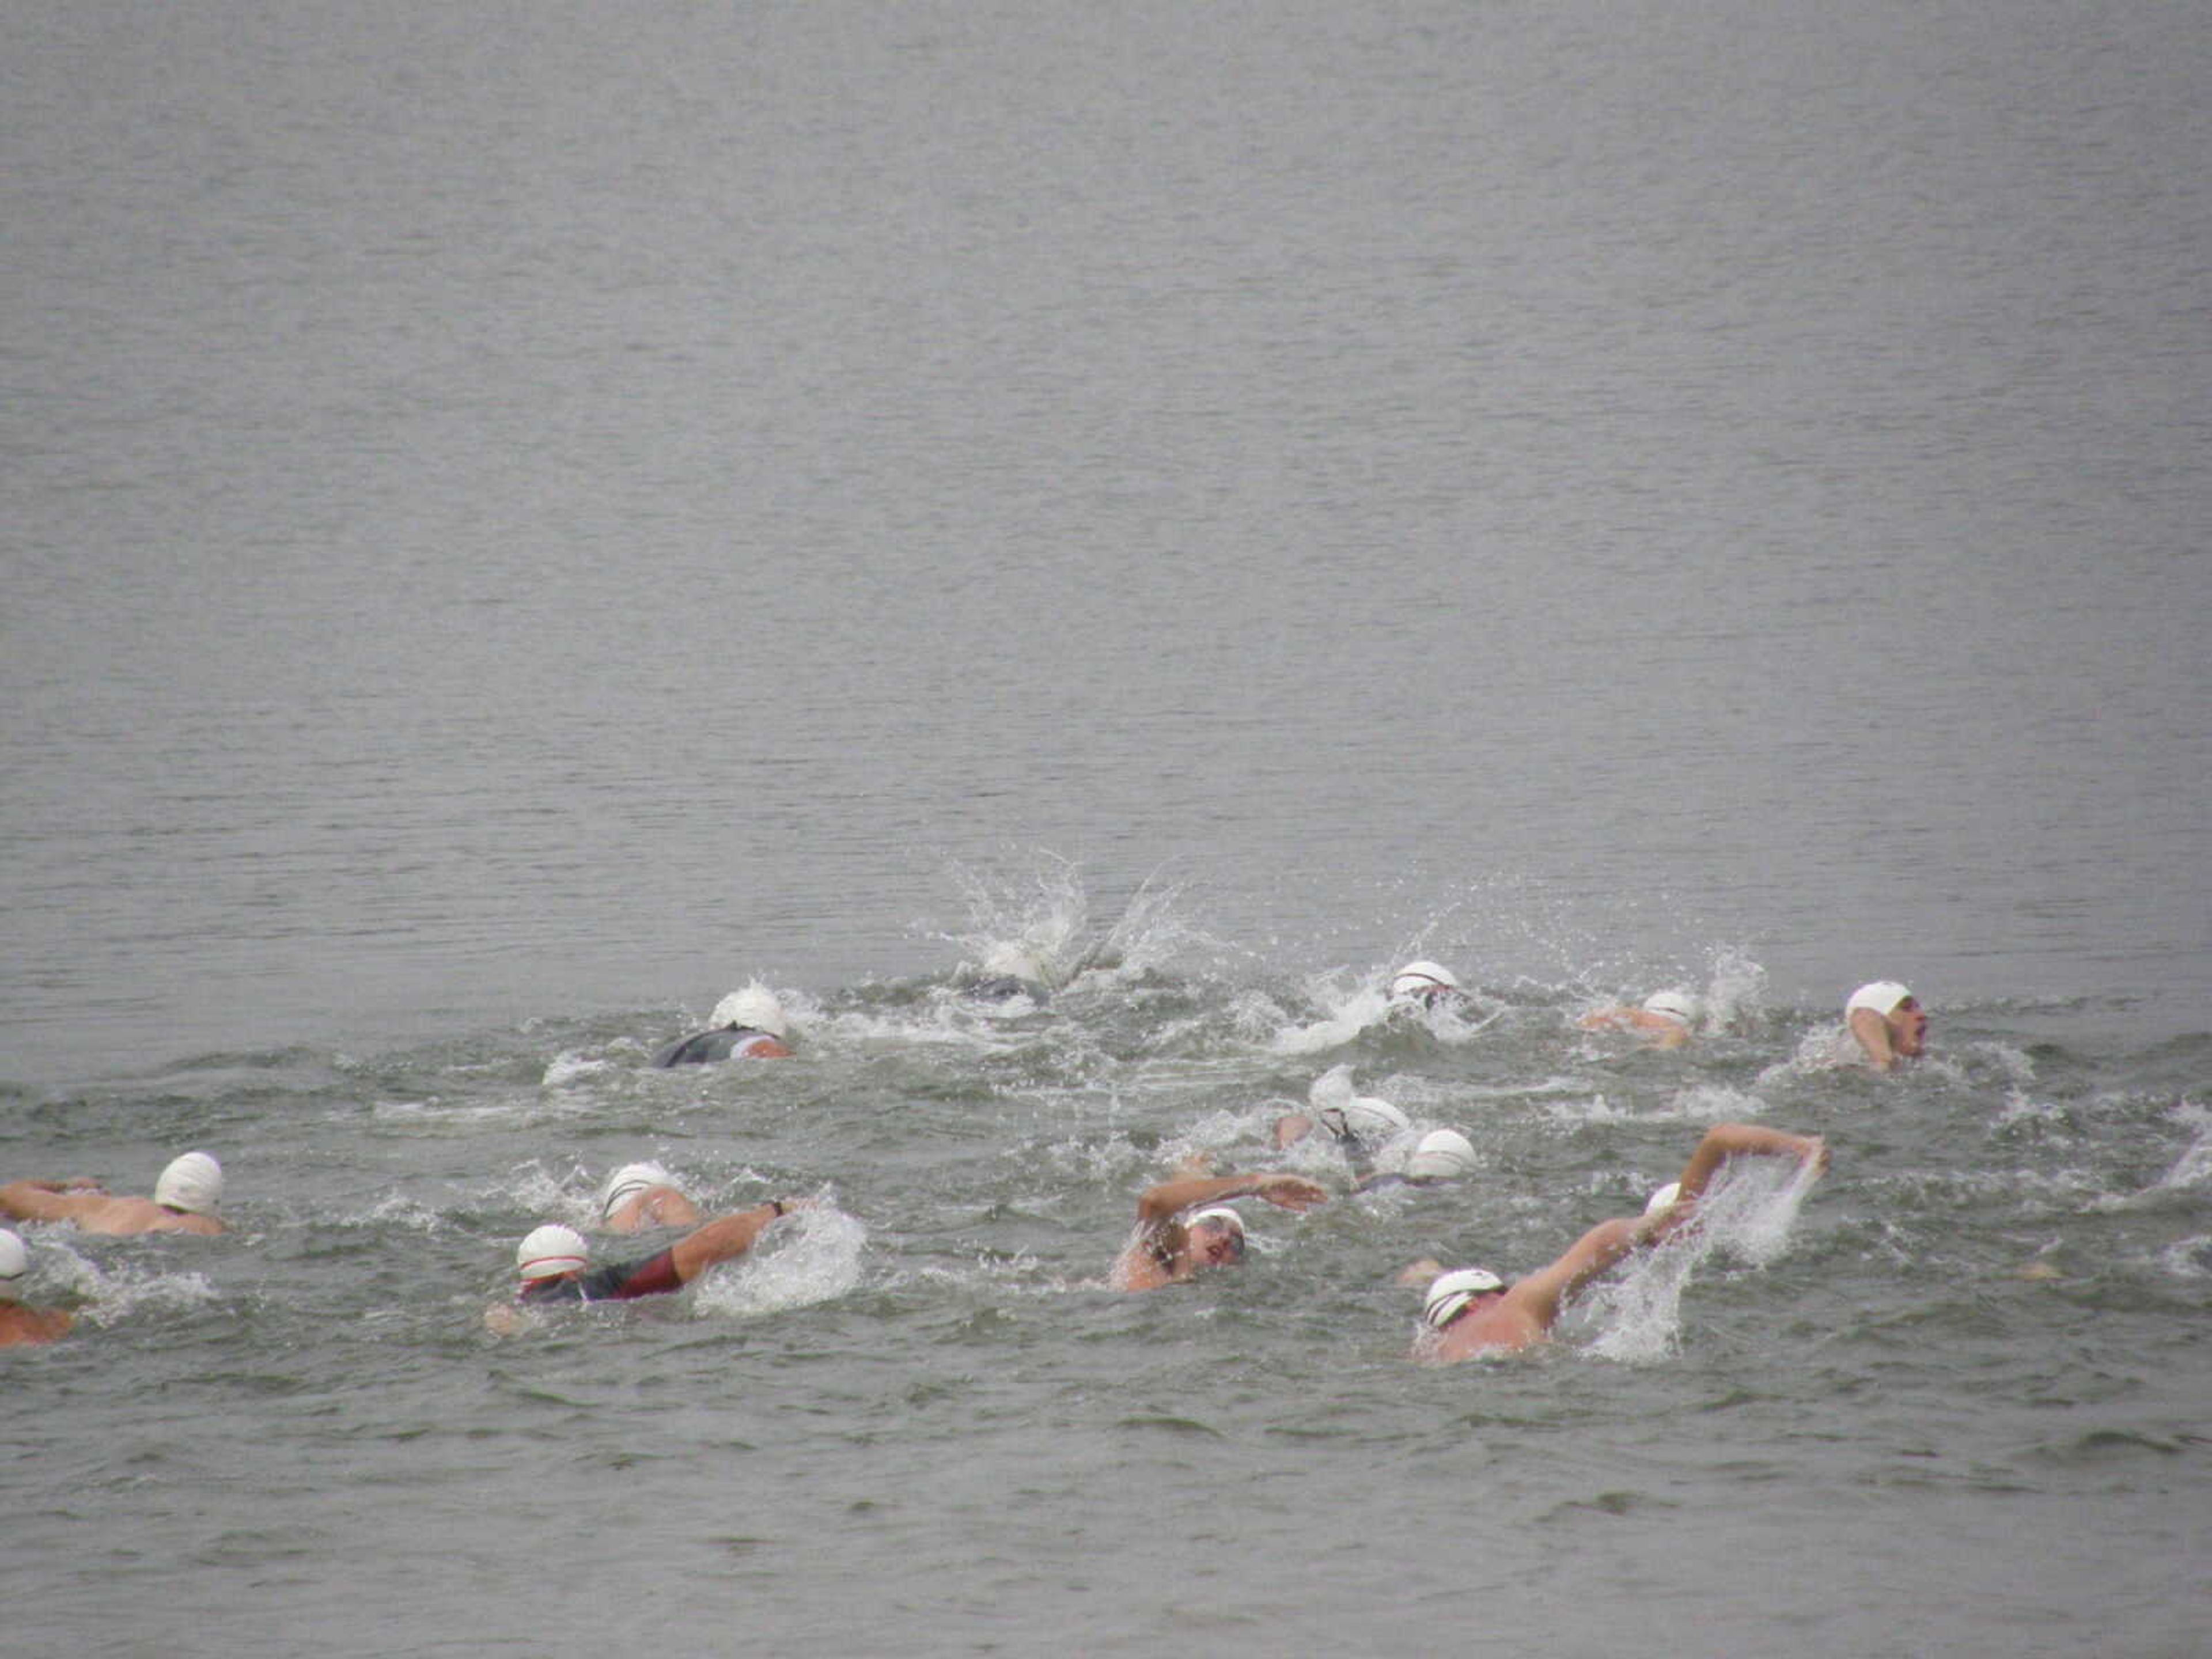 In the first stage of the Coors Light Triathlon, participants swim 700 meters.  
- Submitted photo